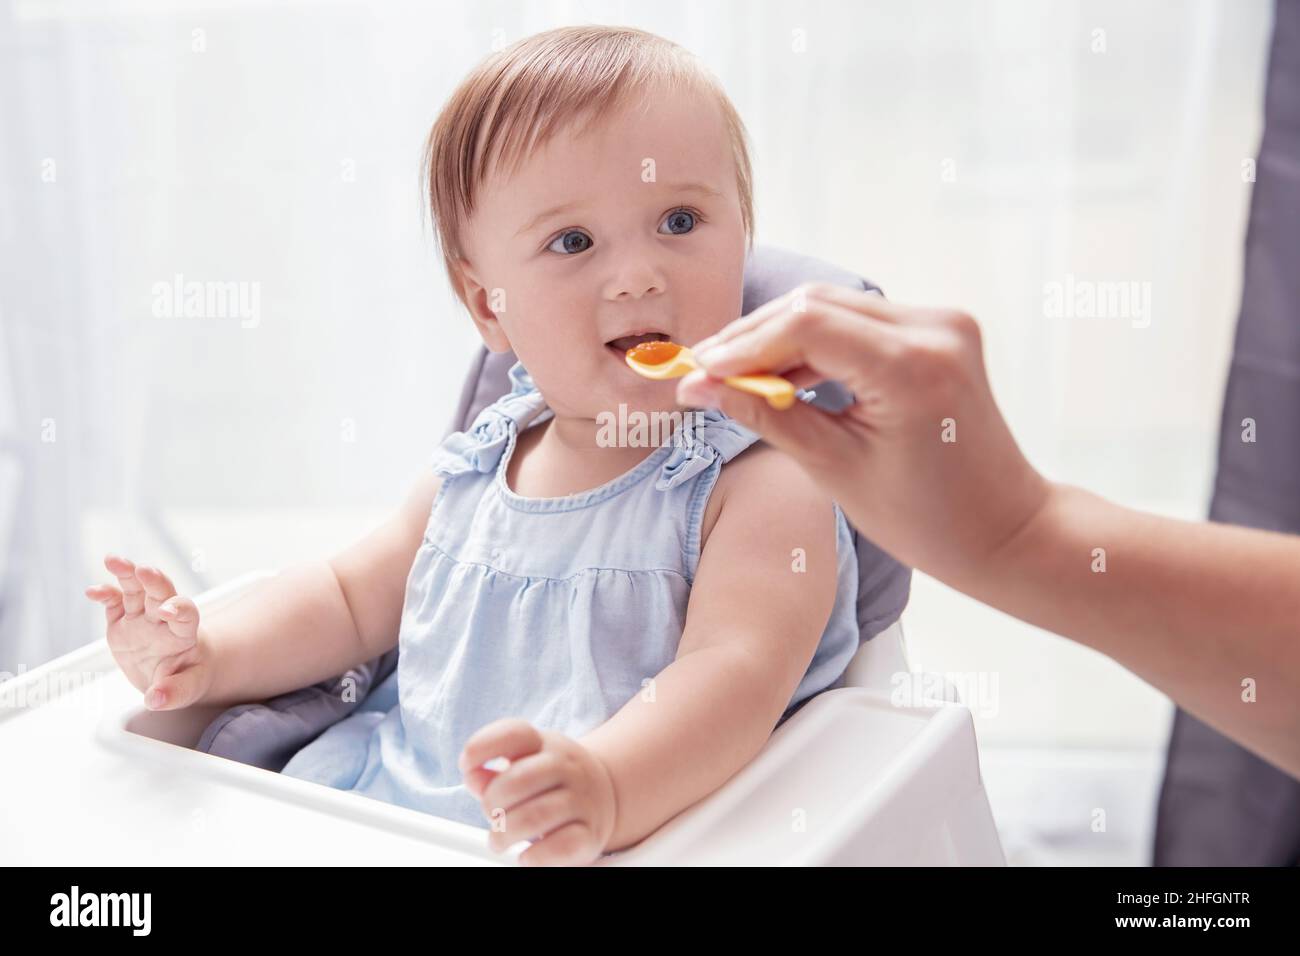 Infant baby girl in blue dress is fed with spoon holded by her mother Stock Photo